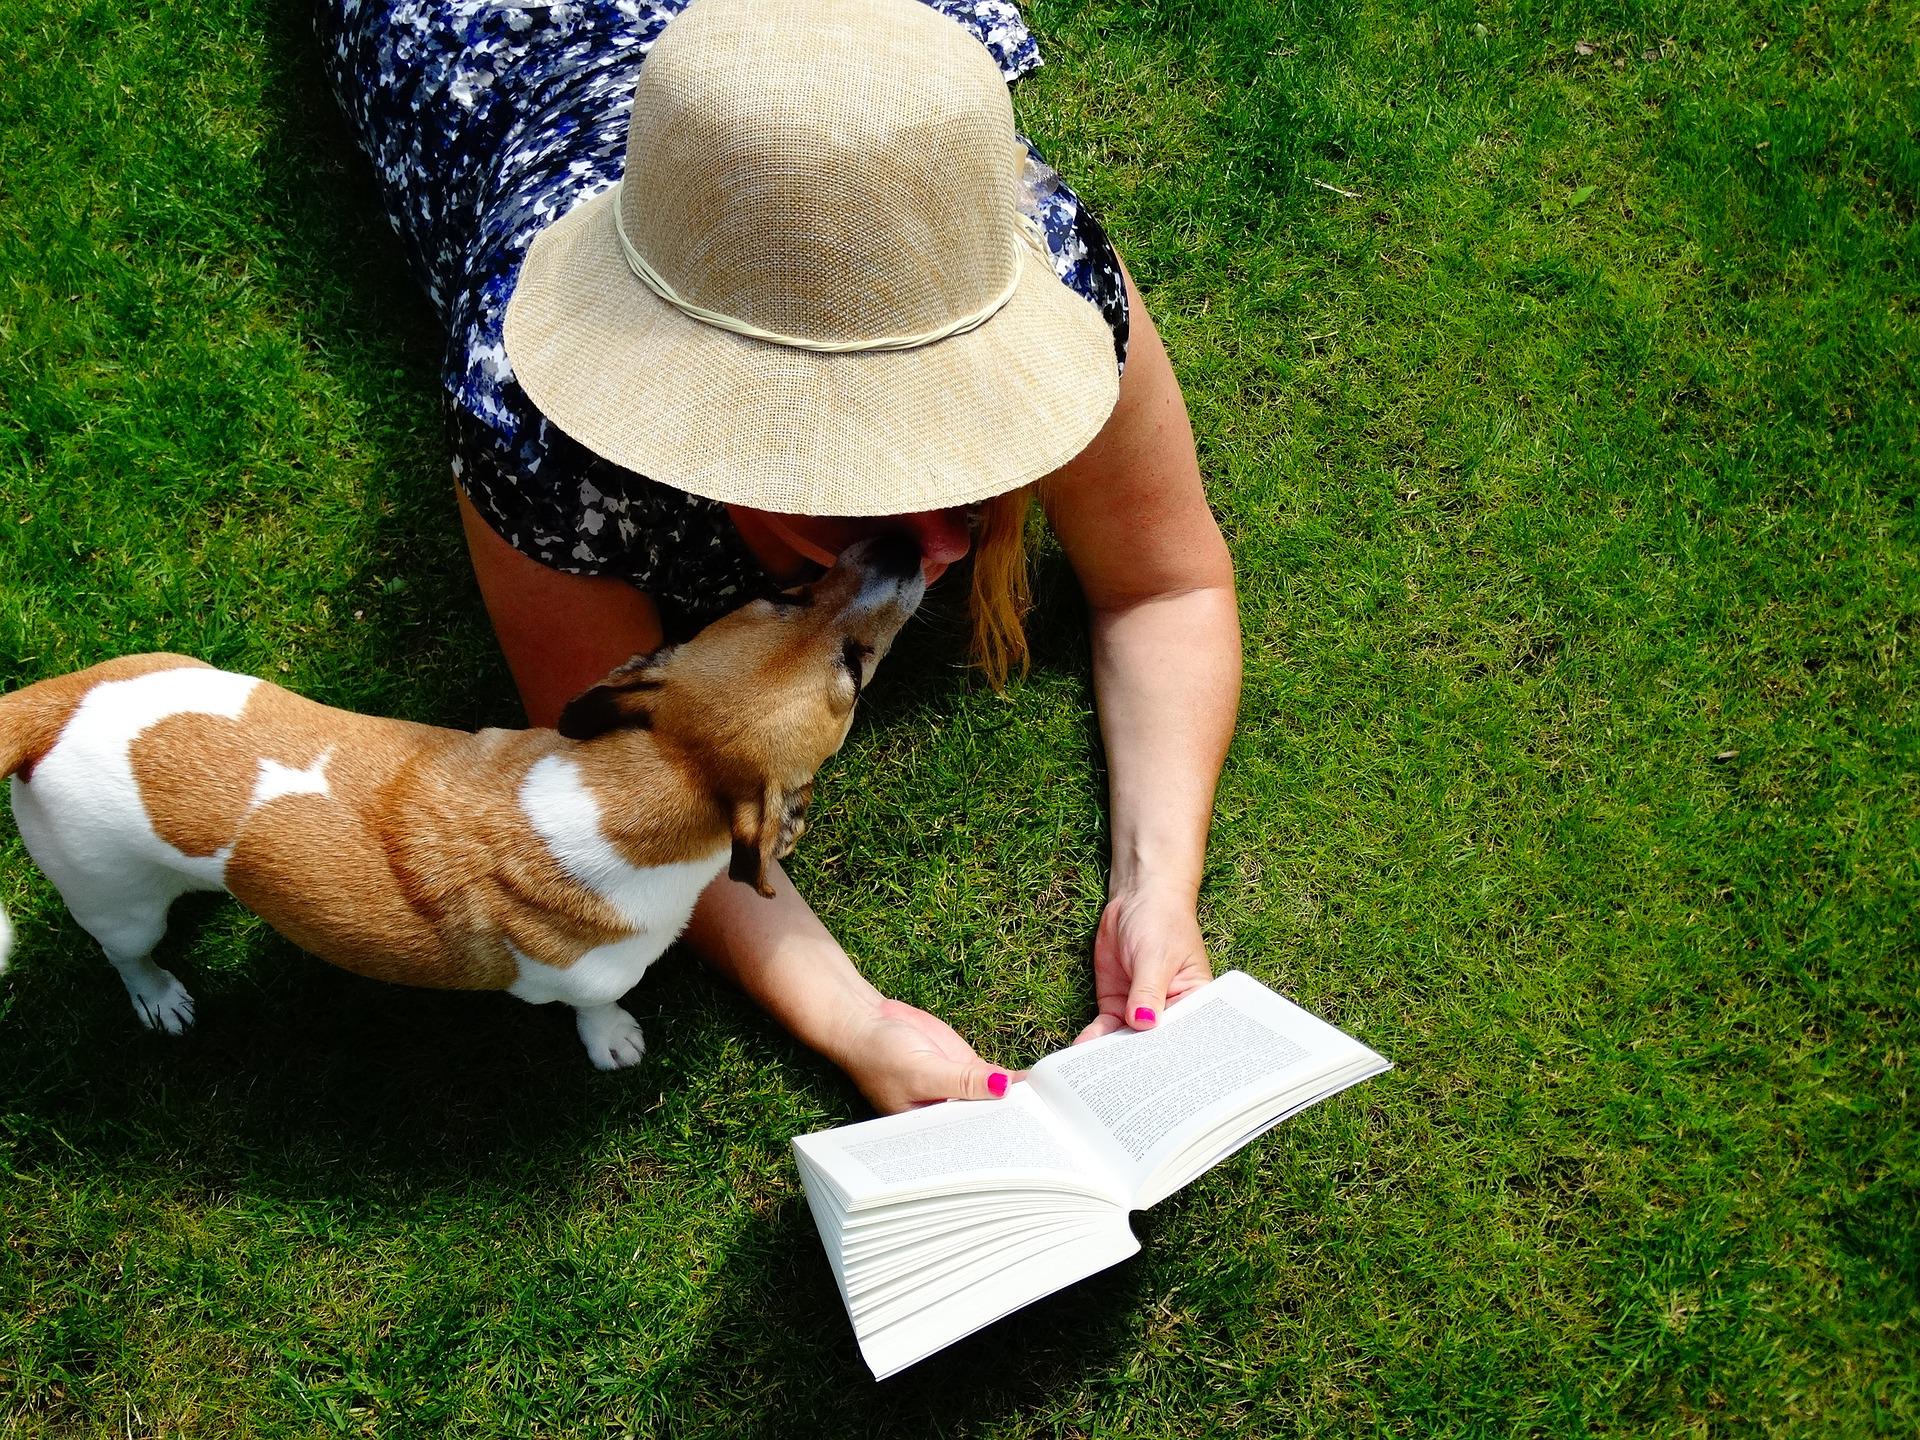 Woman with dog and book.